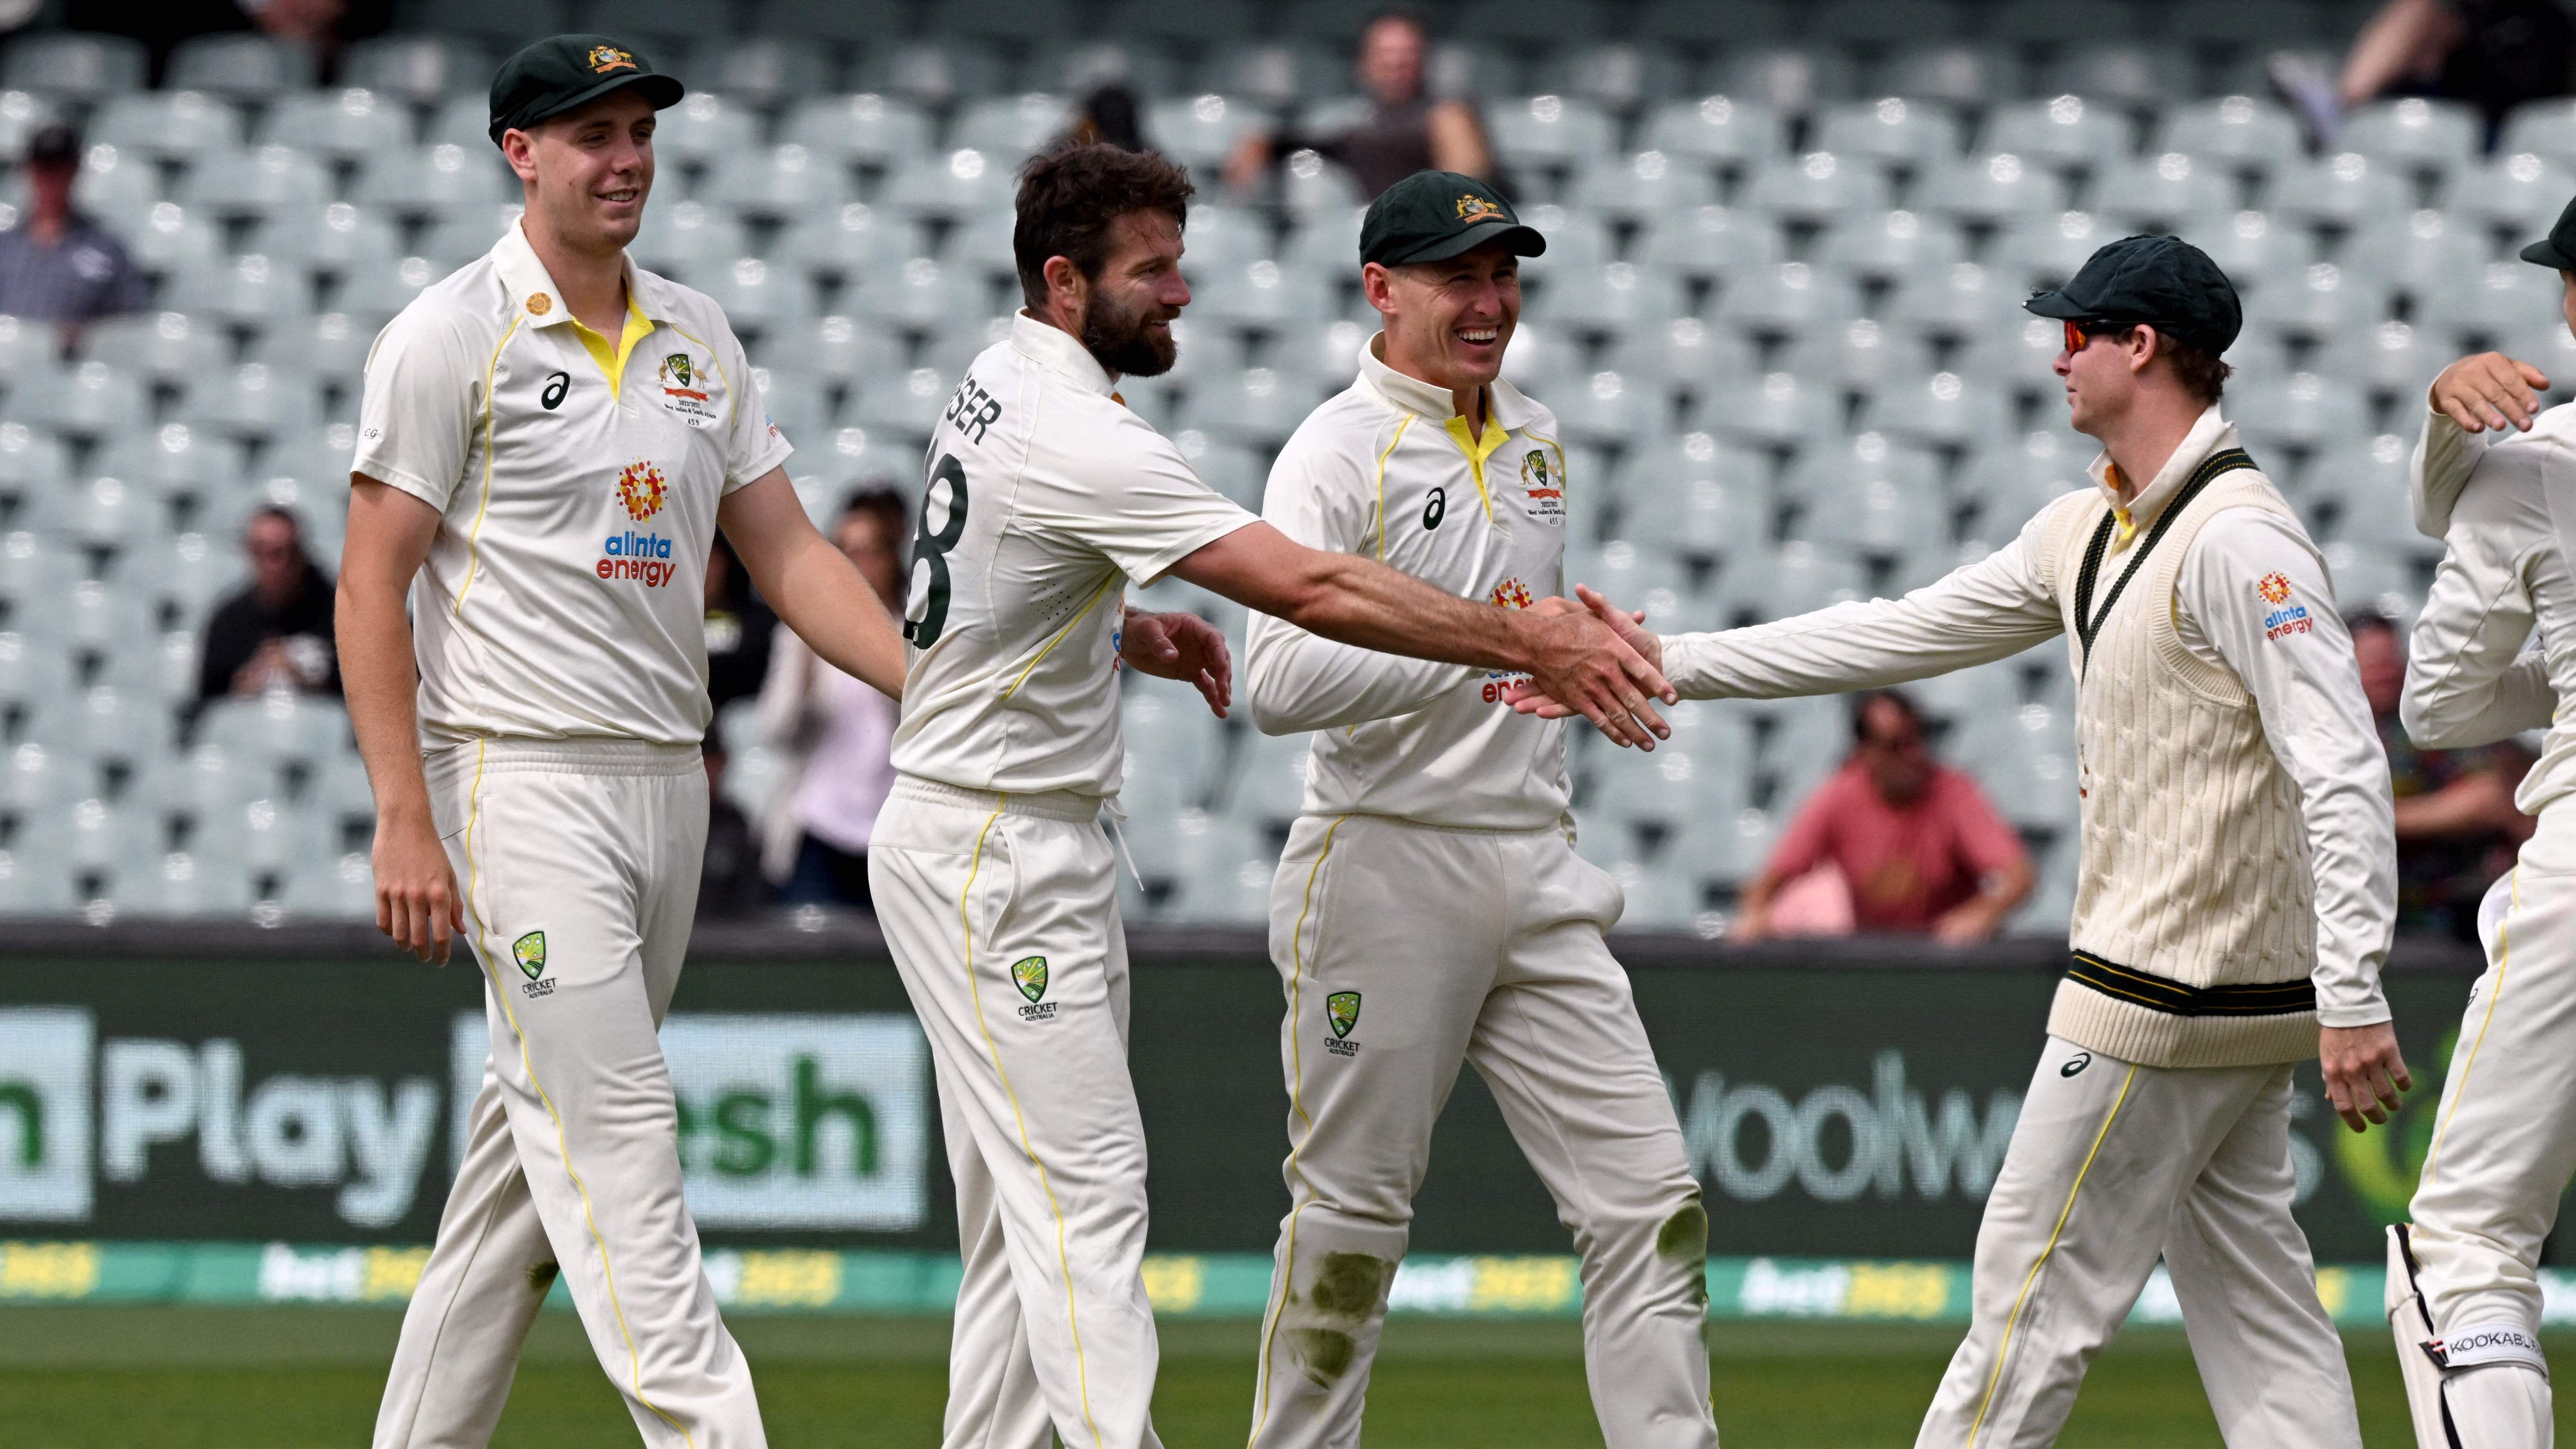 Australia's Michael Neser (2nd L) is congratulated by captain Steve Smith (R) after their victory during the fourth day of the second cricket Test match between Australia and the West Indies at the Adelaide Oval. Credit: AFP Photo 